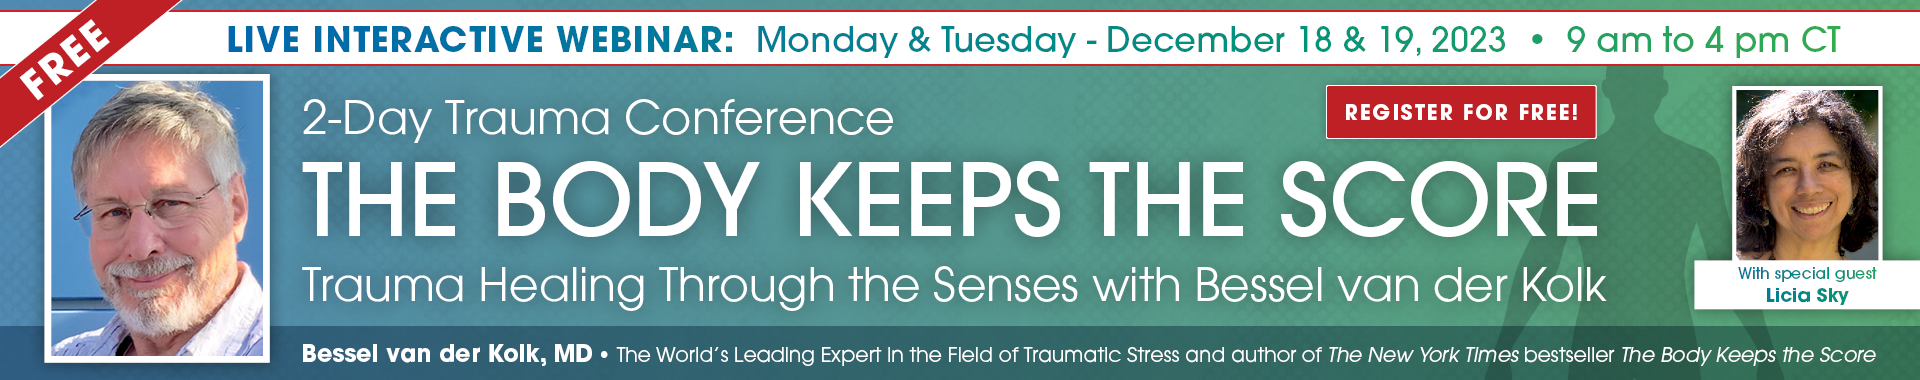 2-Day: Trauma Conference: The Body Keeps the Score-Trauma Healing Through the Senses with Bessel van der Kolk, MD